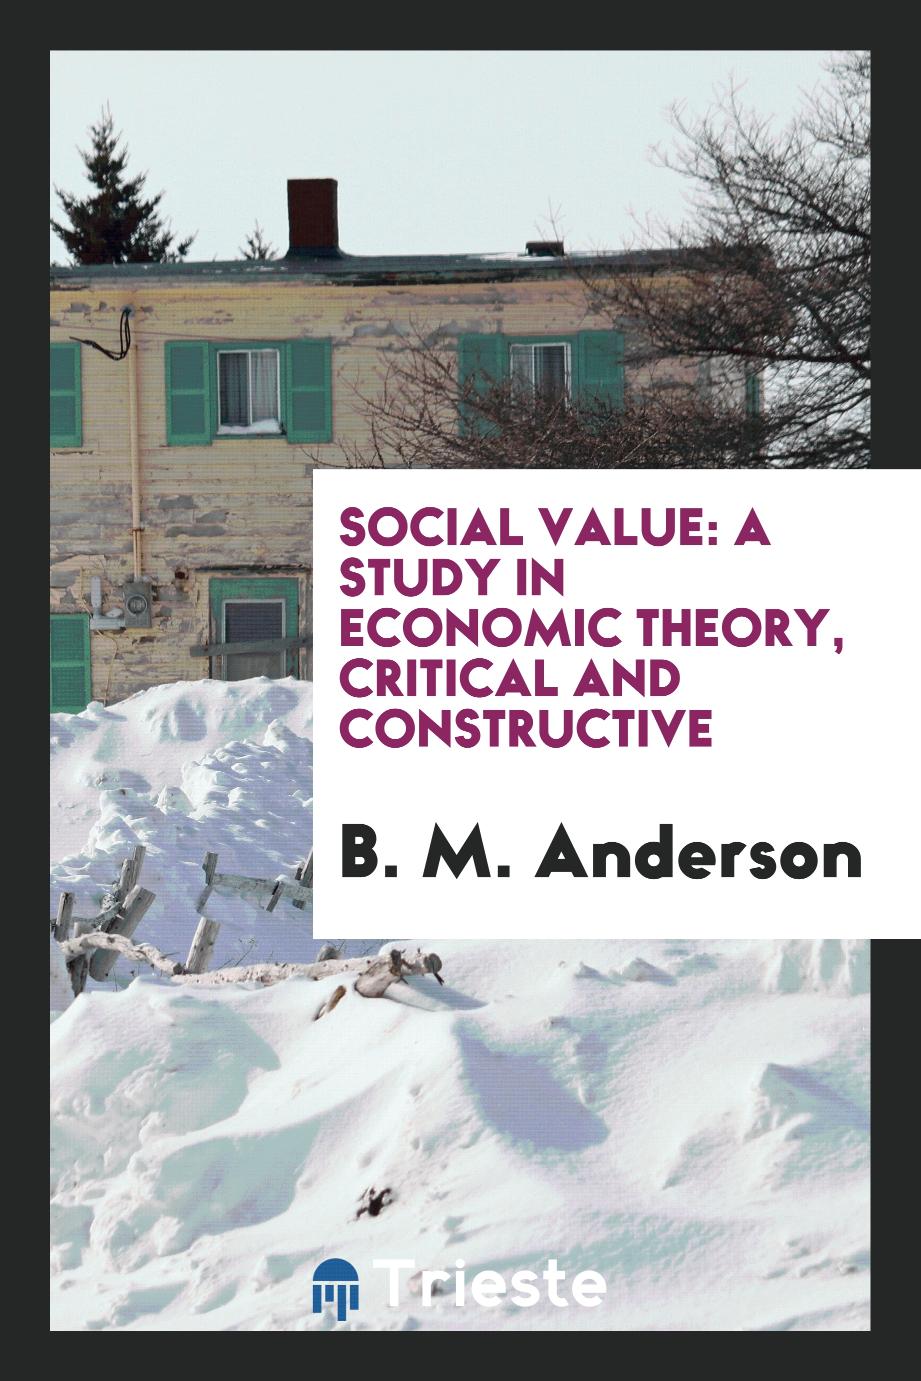 Social value: a study in economic theory, critical and constructive